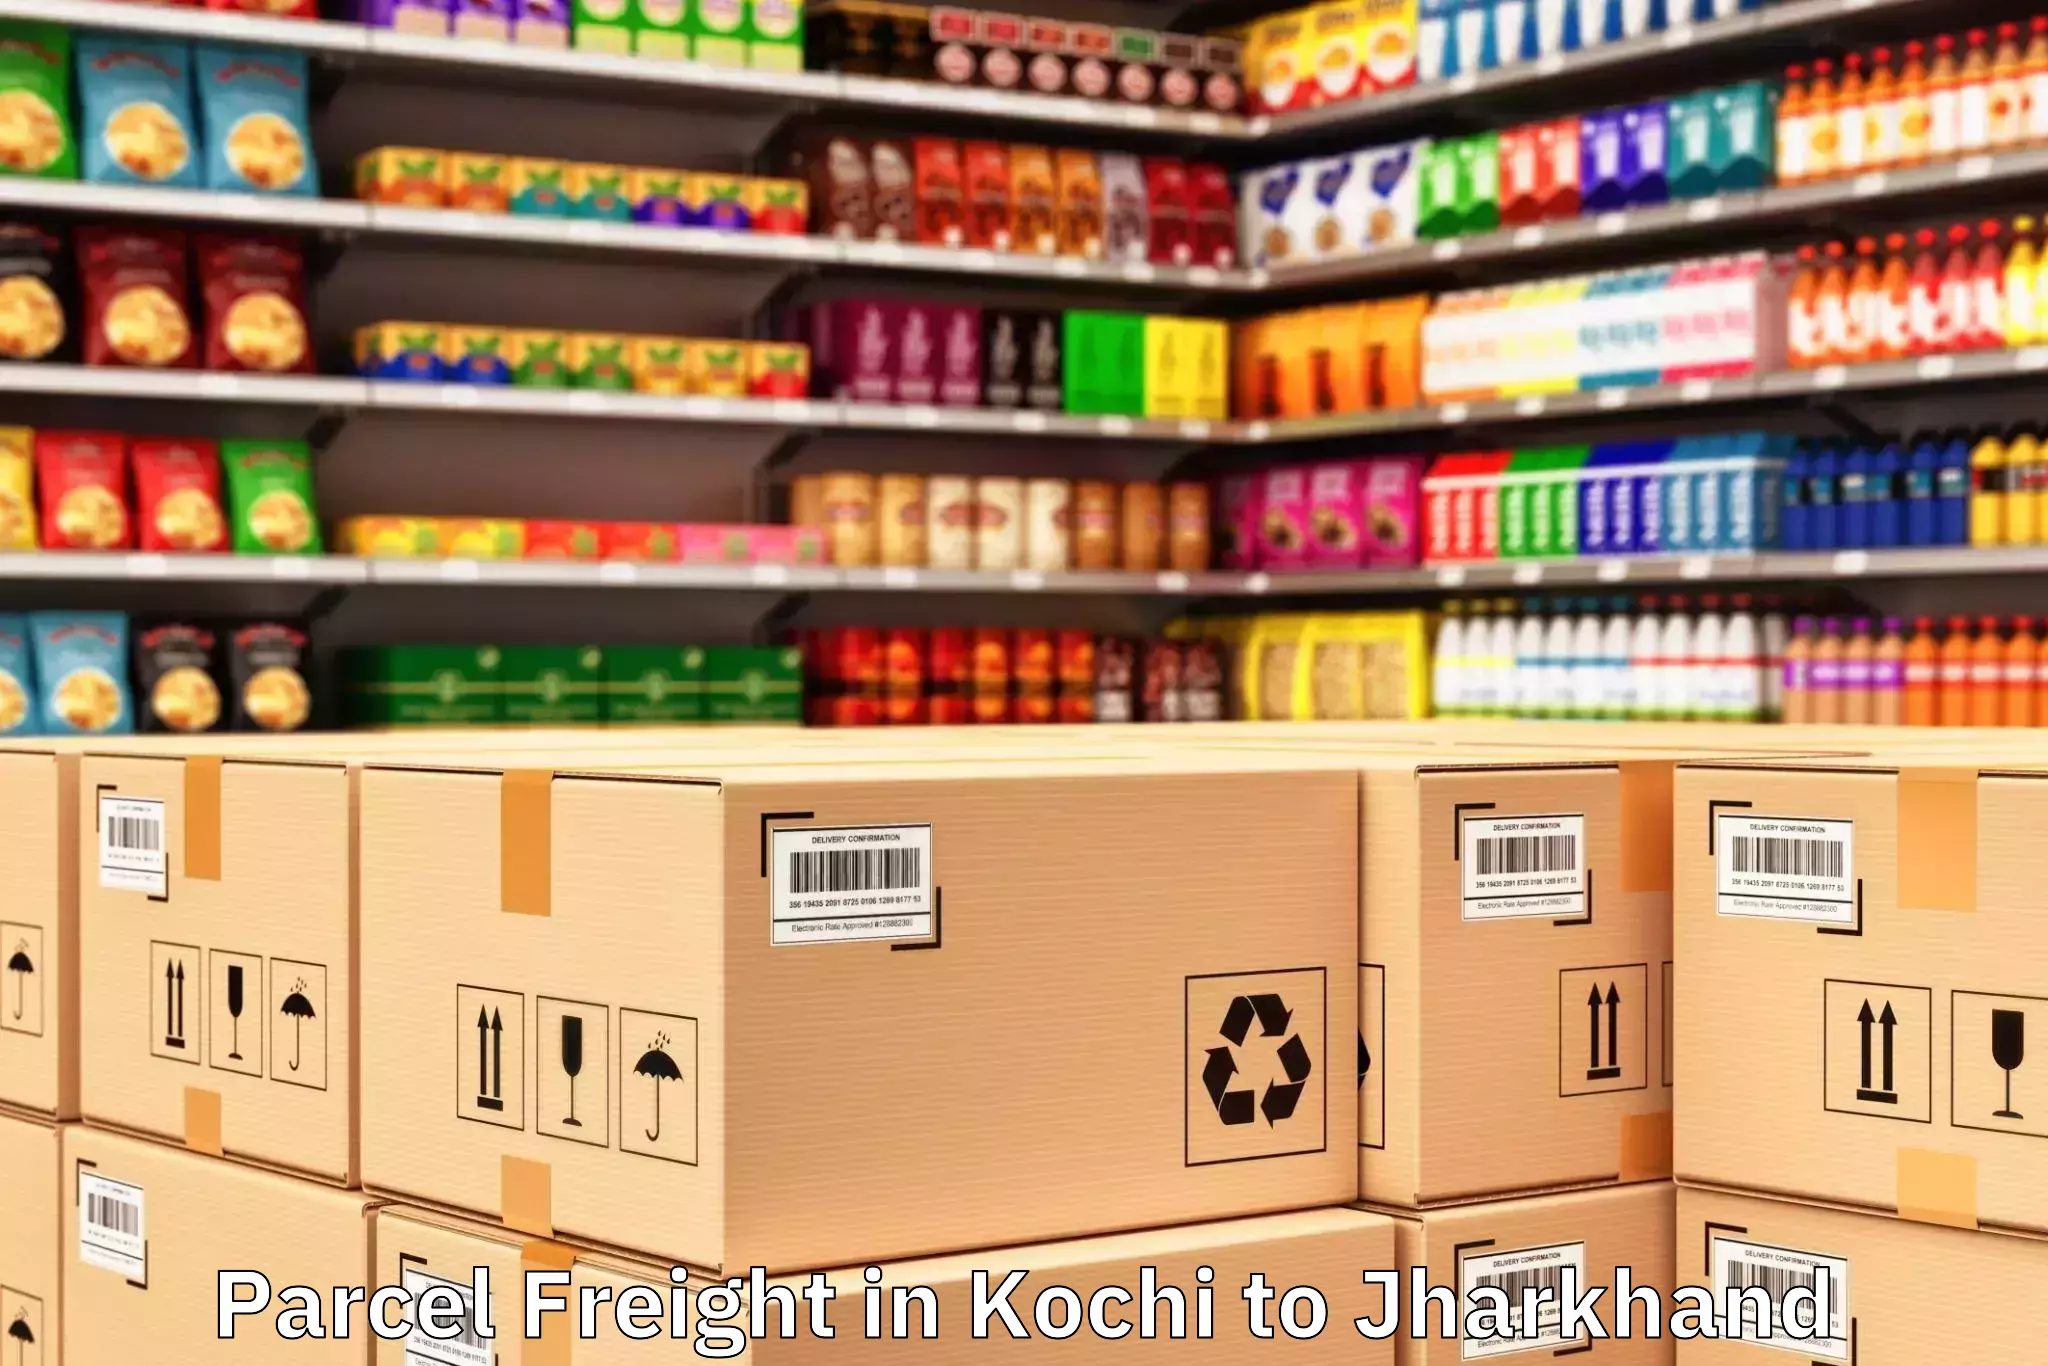 Professional Kochi to Dhanbad Airport Dbd Parcel Freight